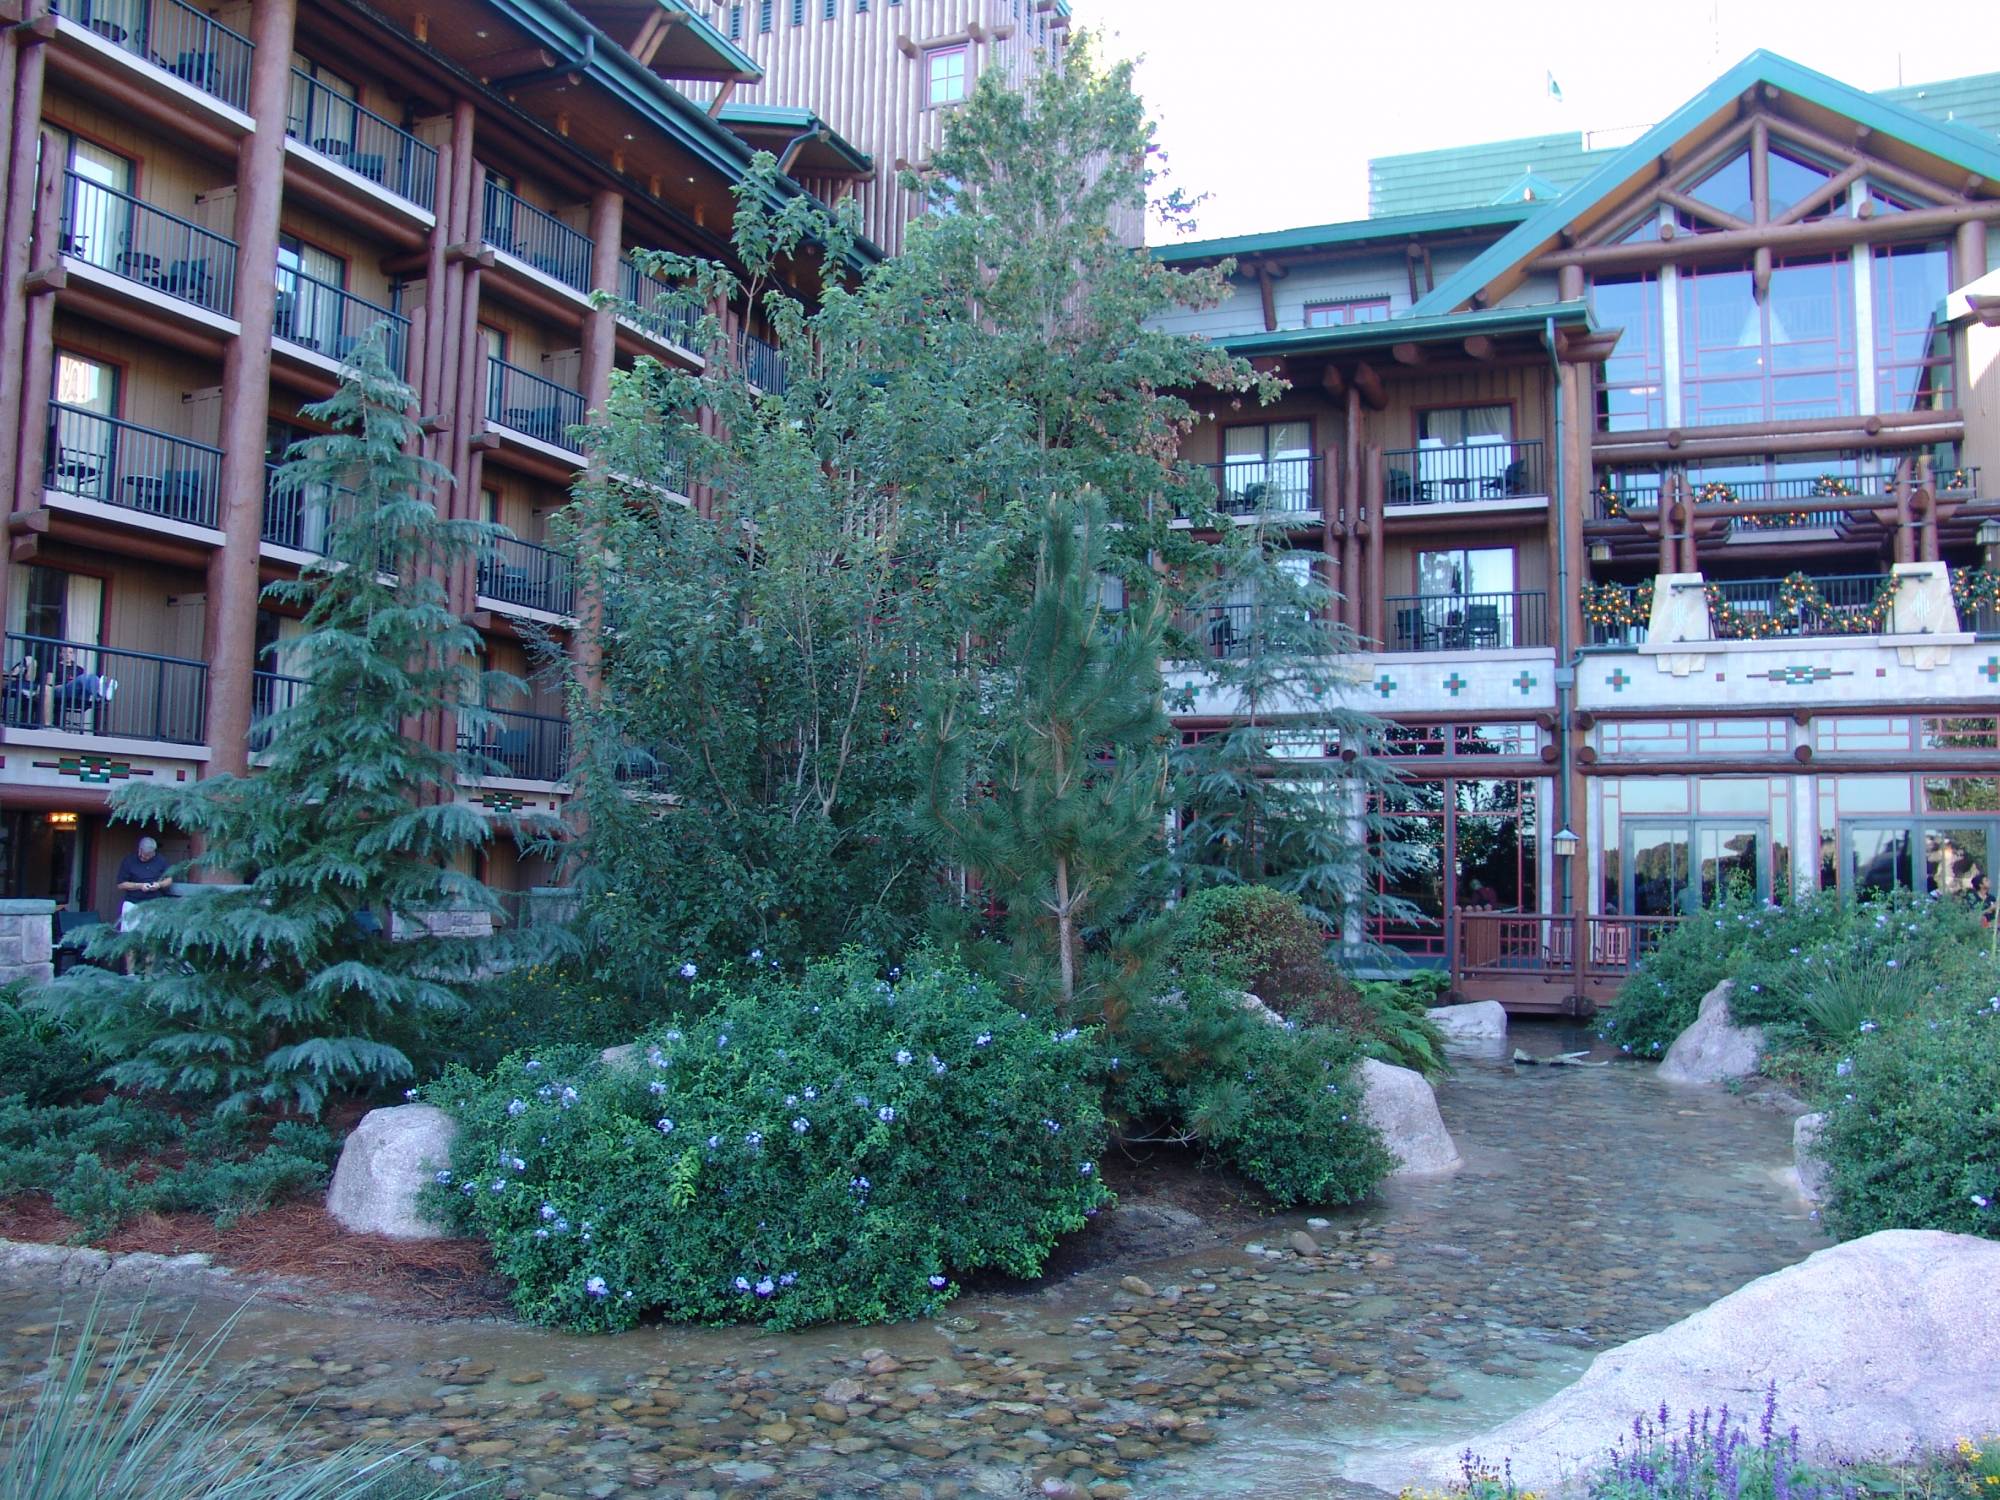 Wilderness Lodge - looking back at lobby building